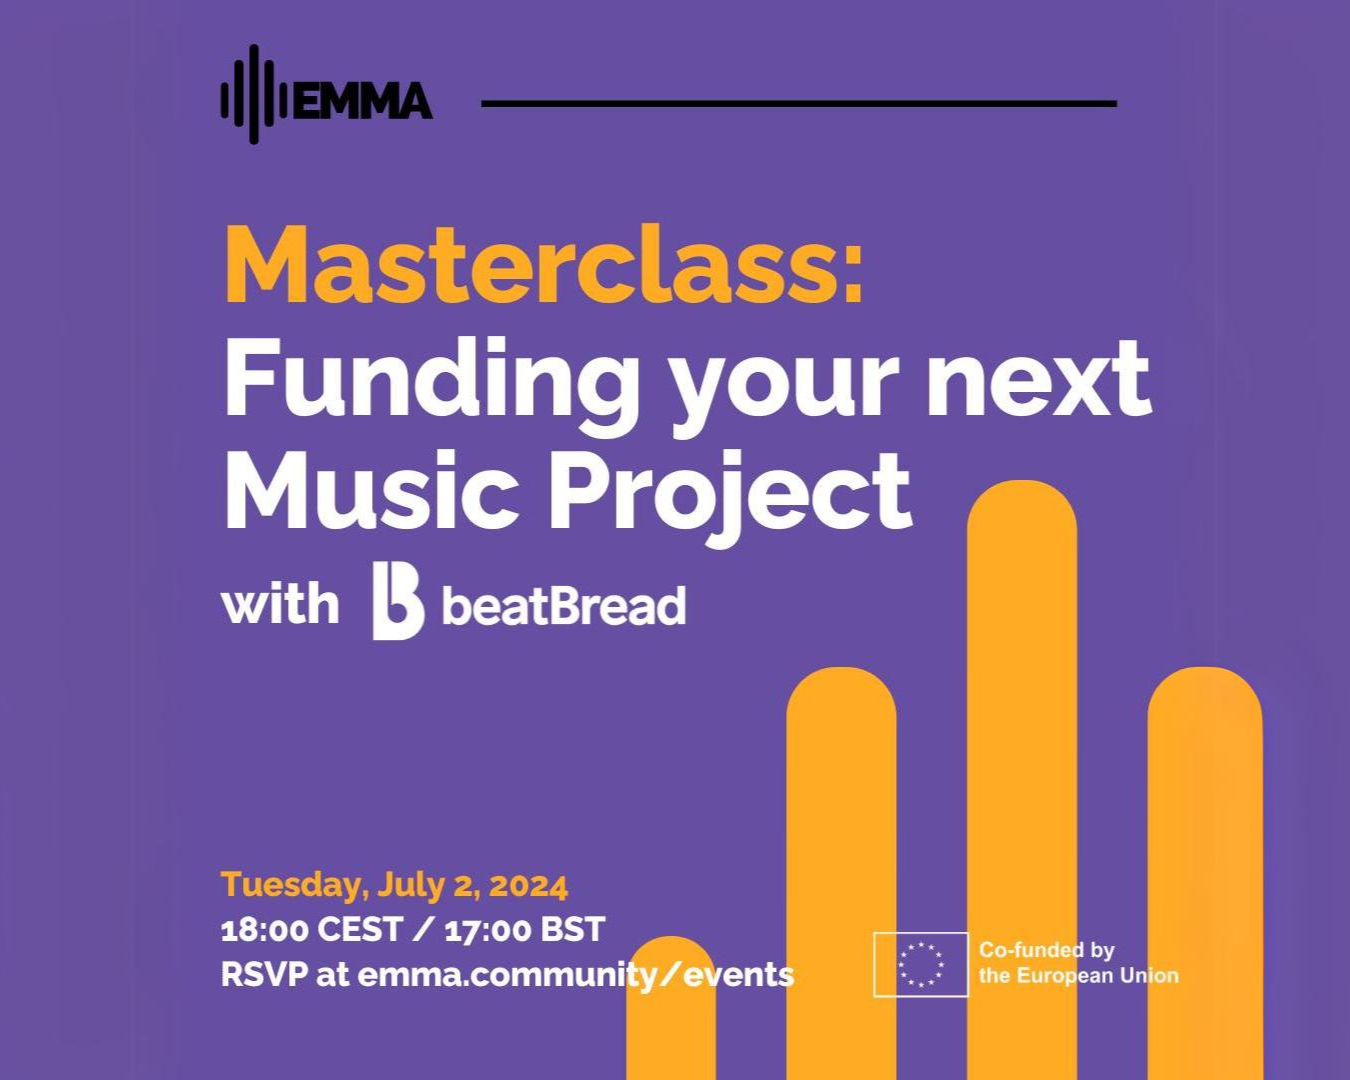 EMMA Masterclass: Funding your Next Music Project with beatBread